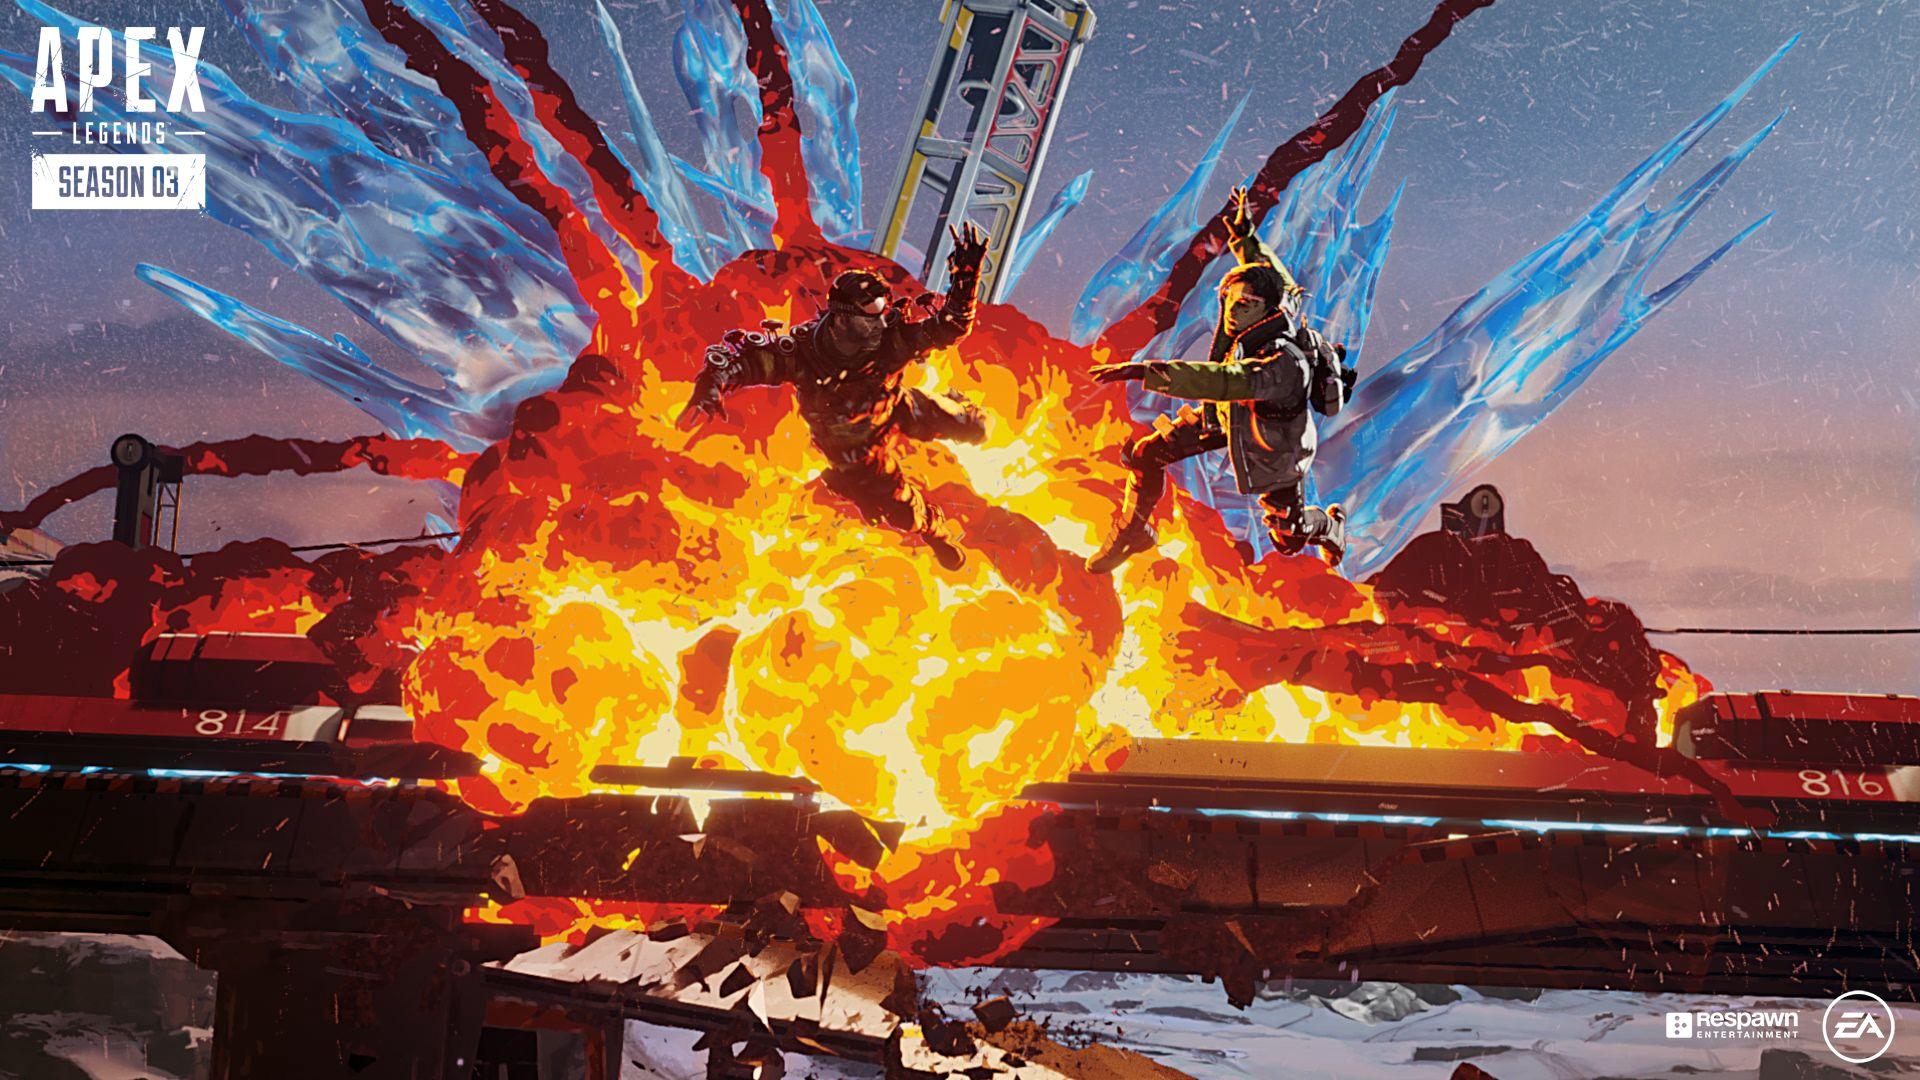 An explosion on Apex Legends' World's End map.